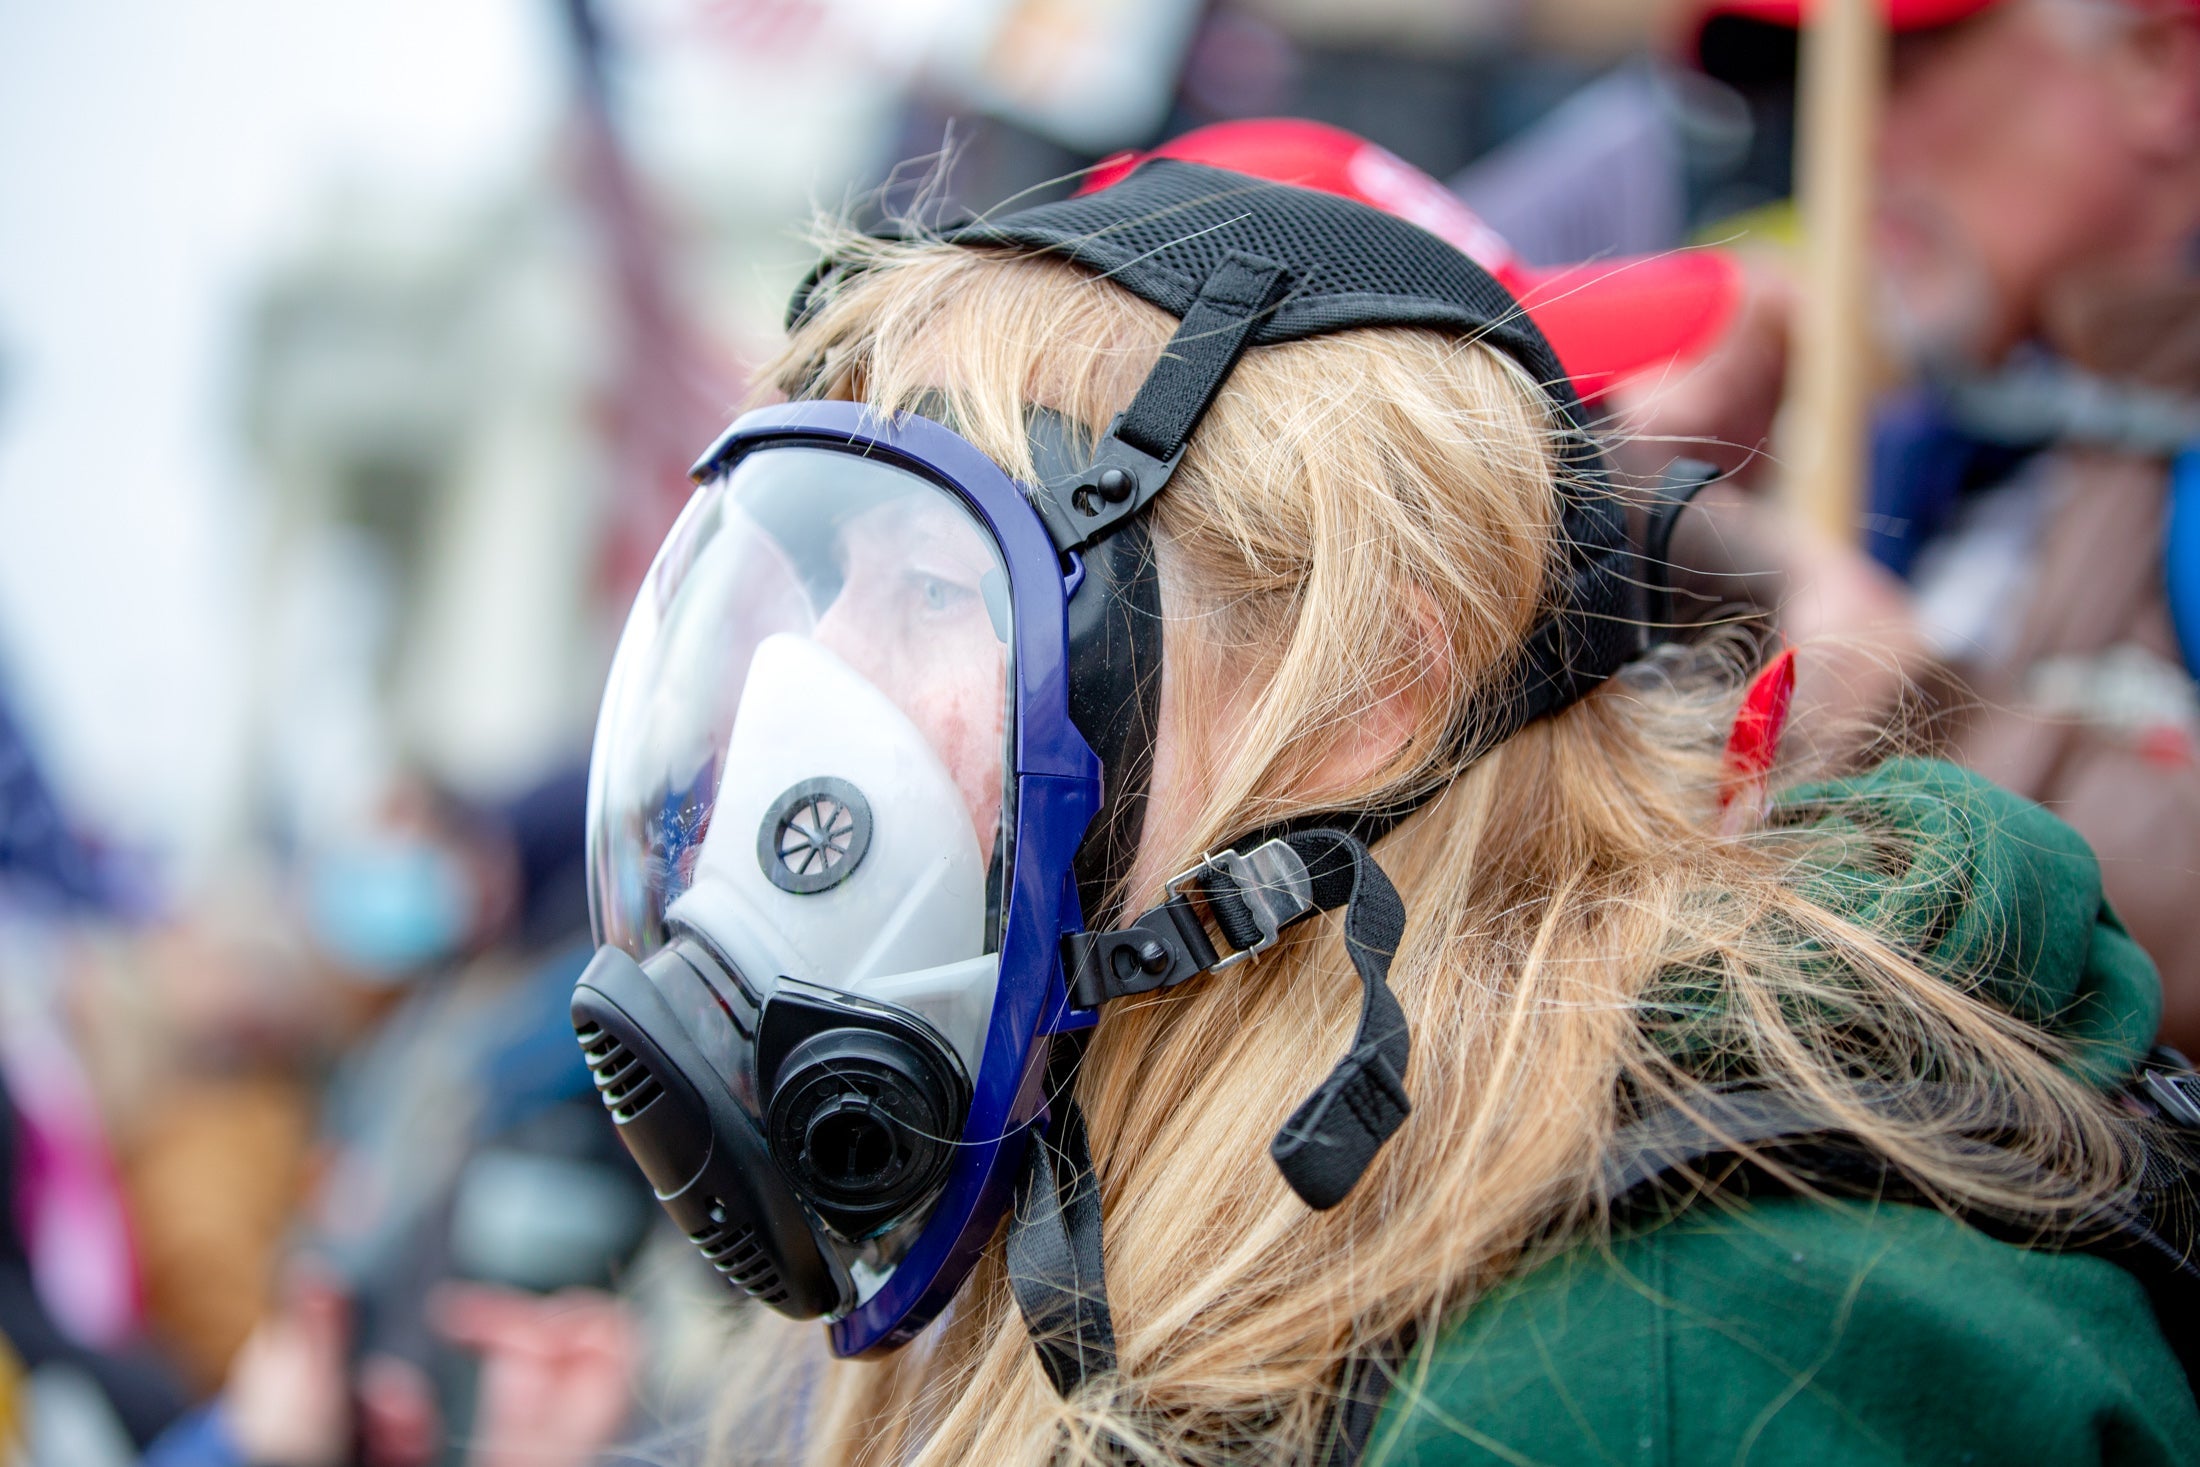 A woman in a gas mask at the Save America March in D.C.